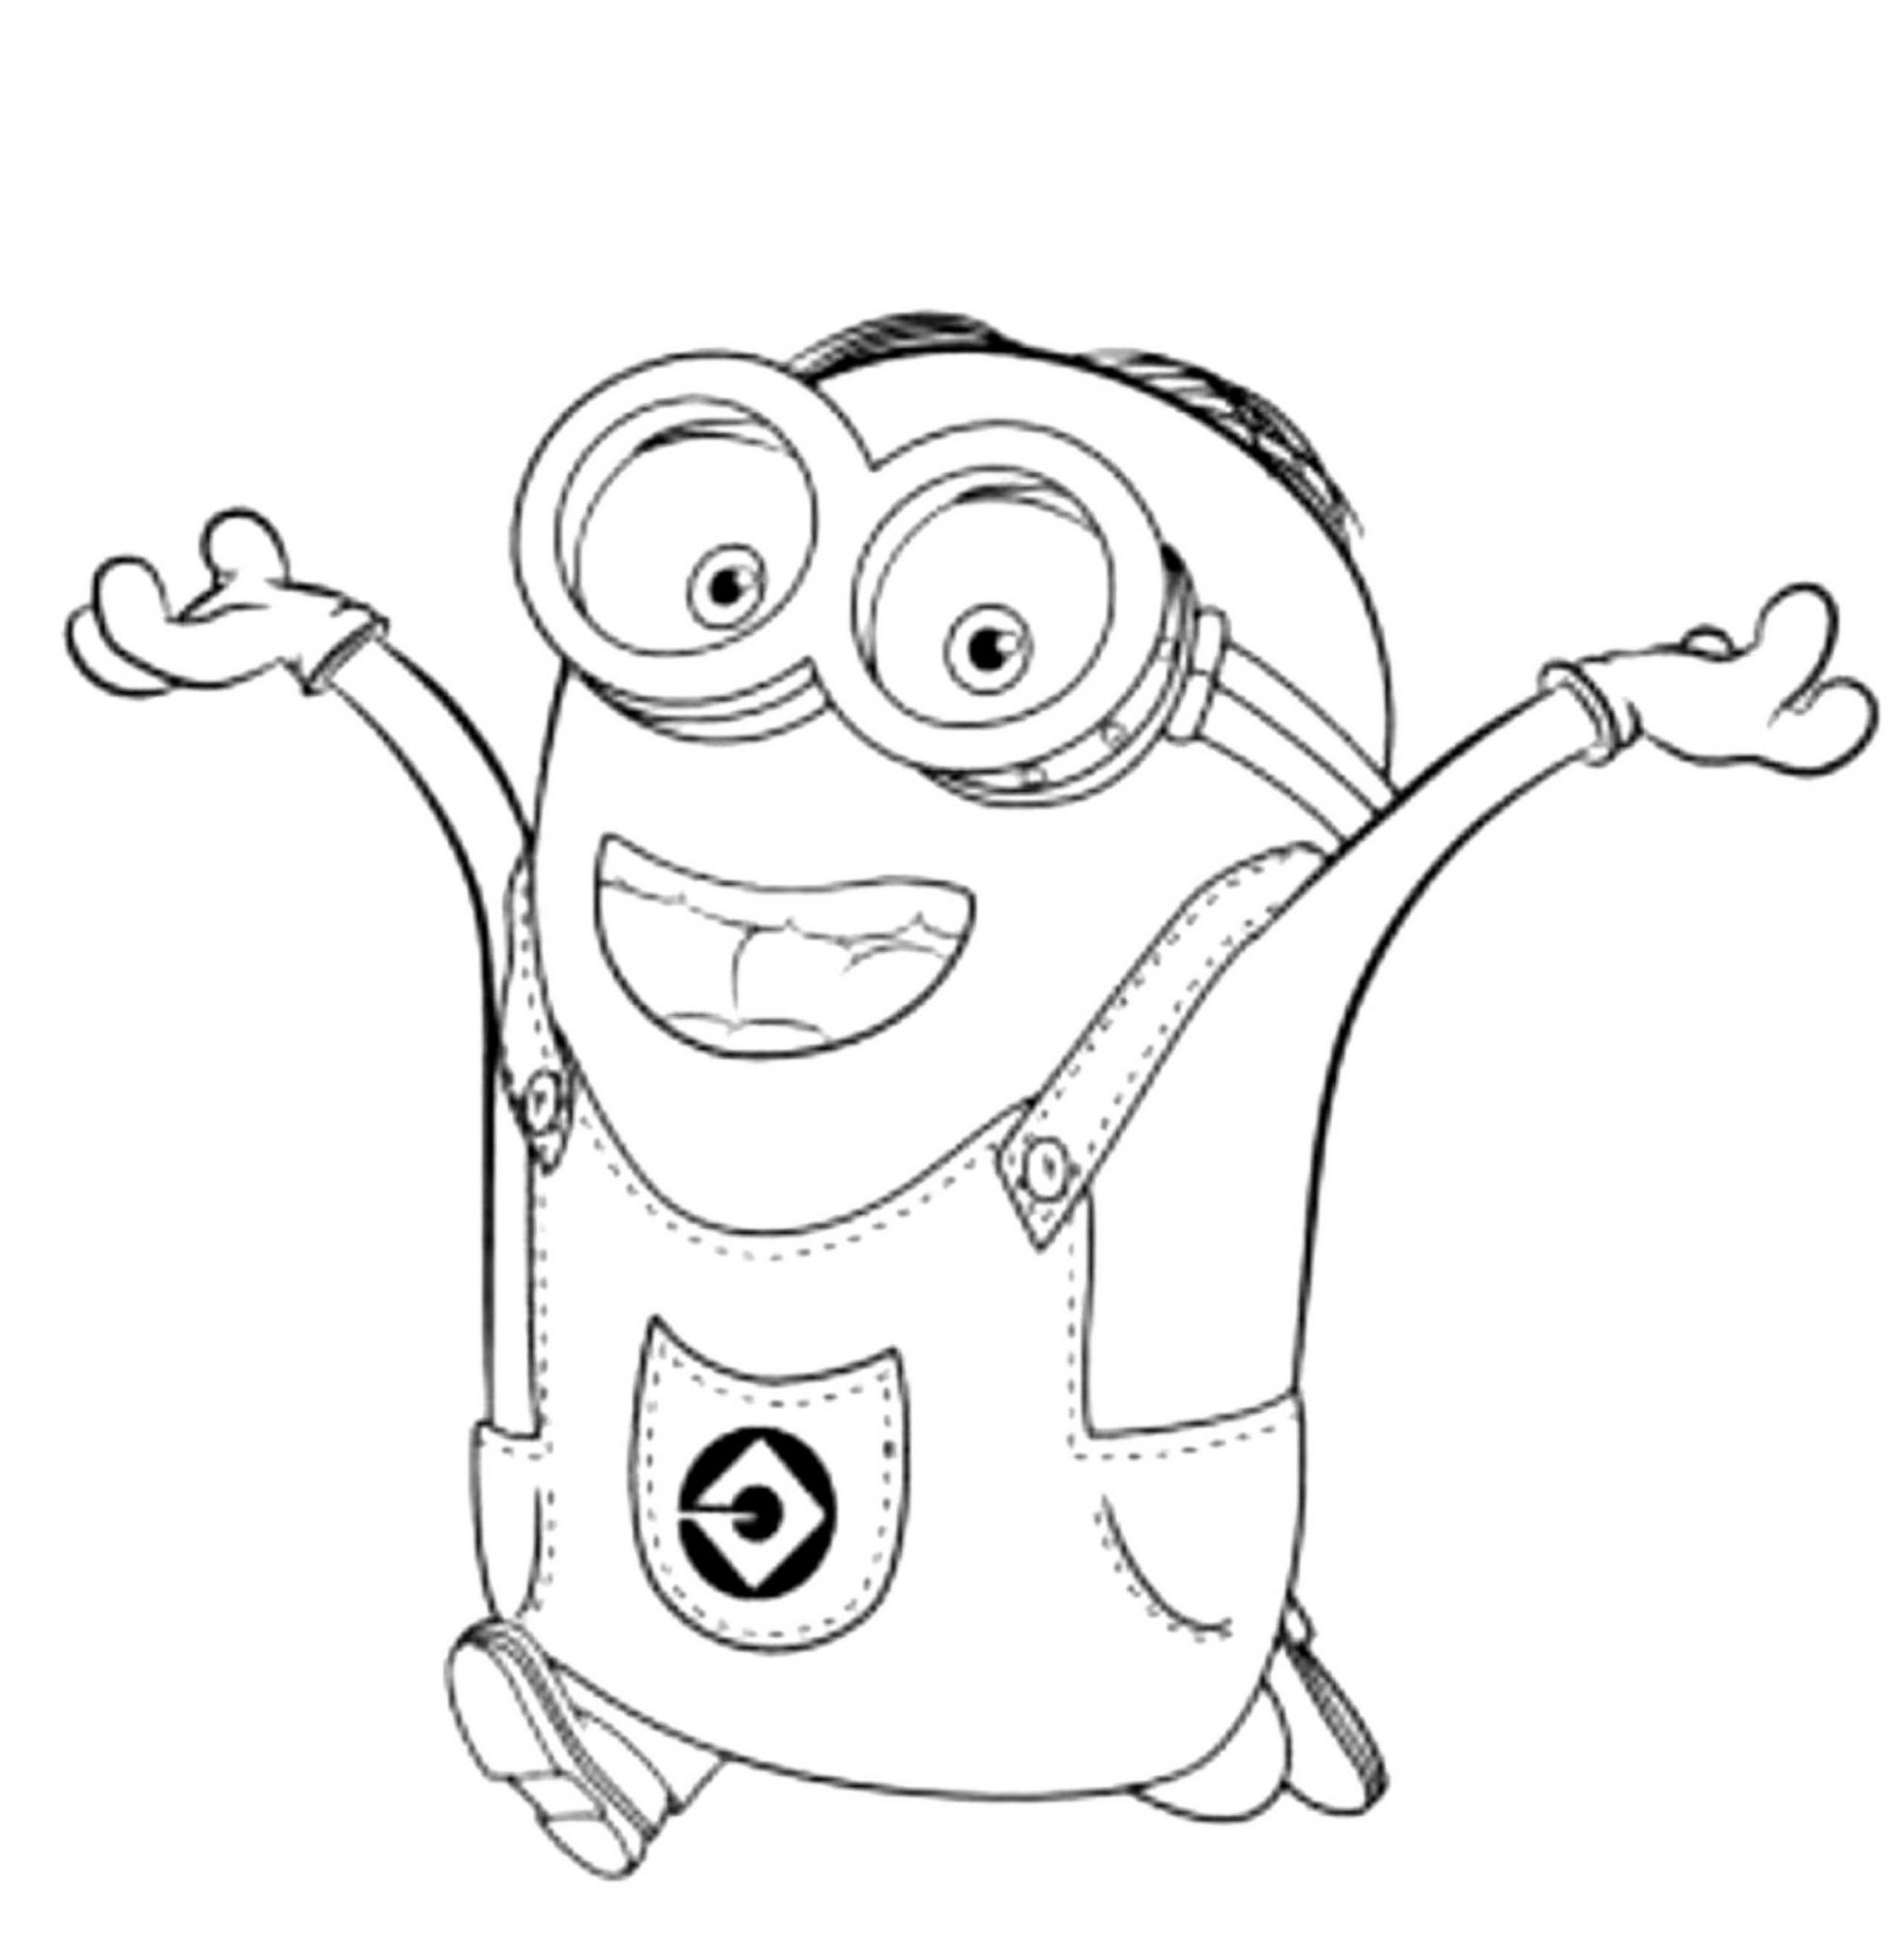 Print Download Minion Coloring Pages for Kids to Have